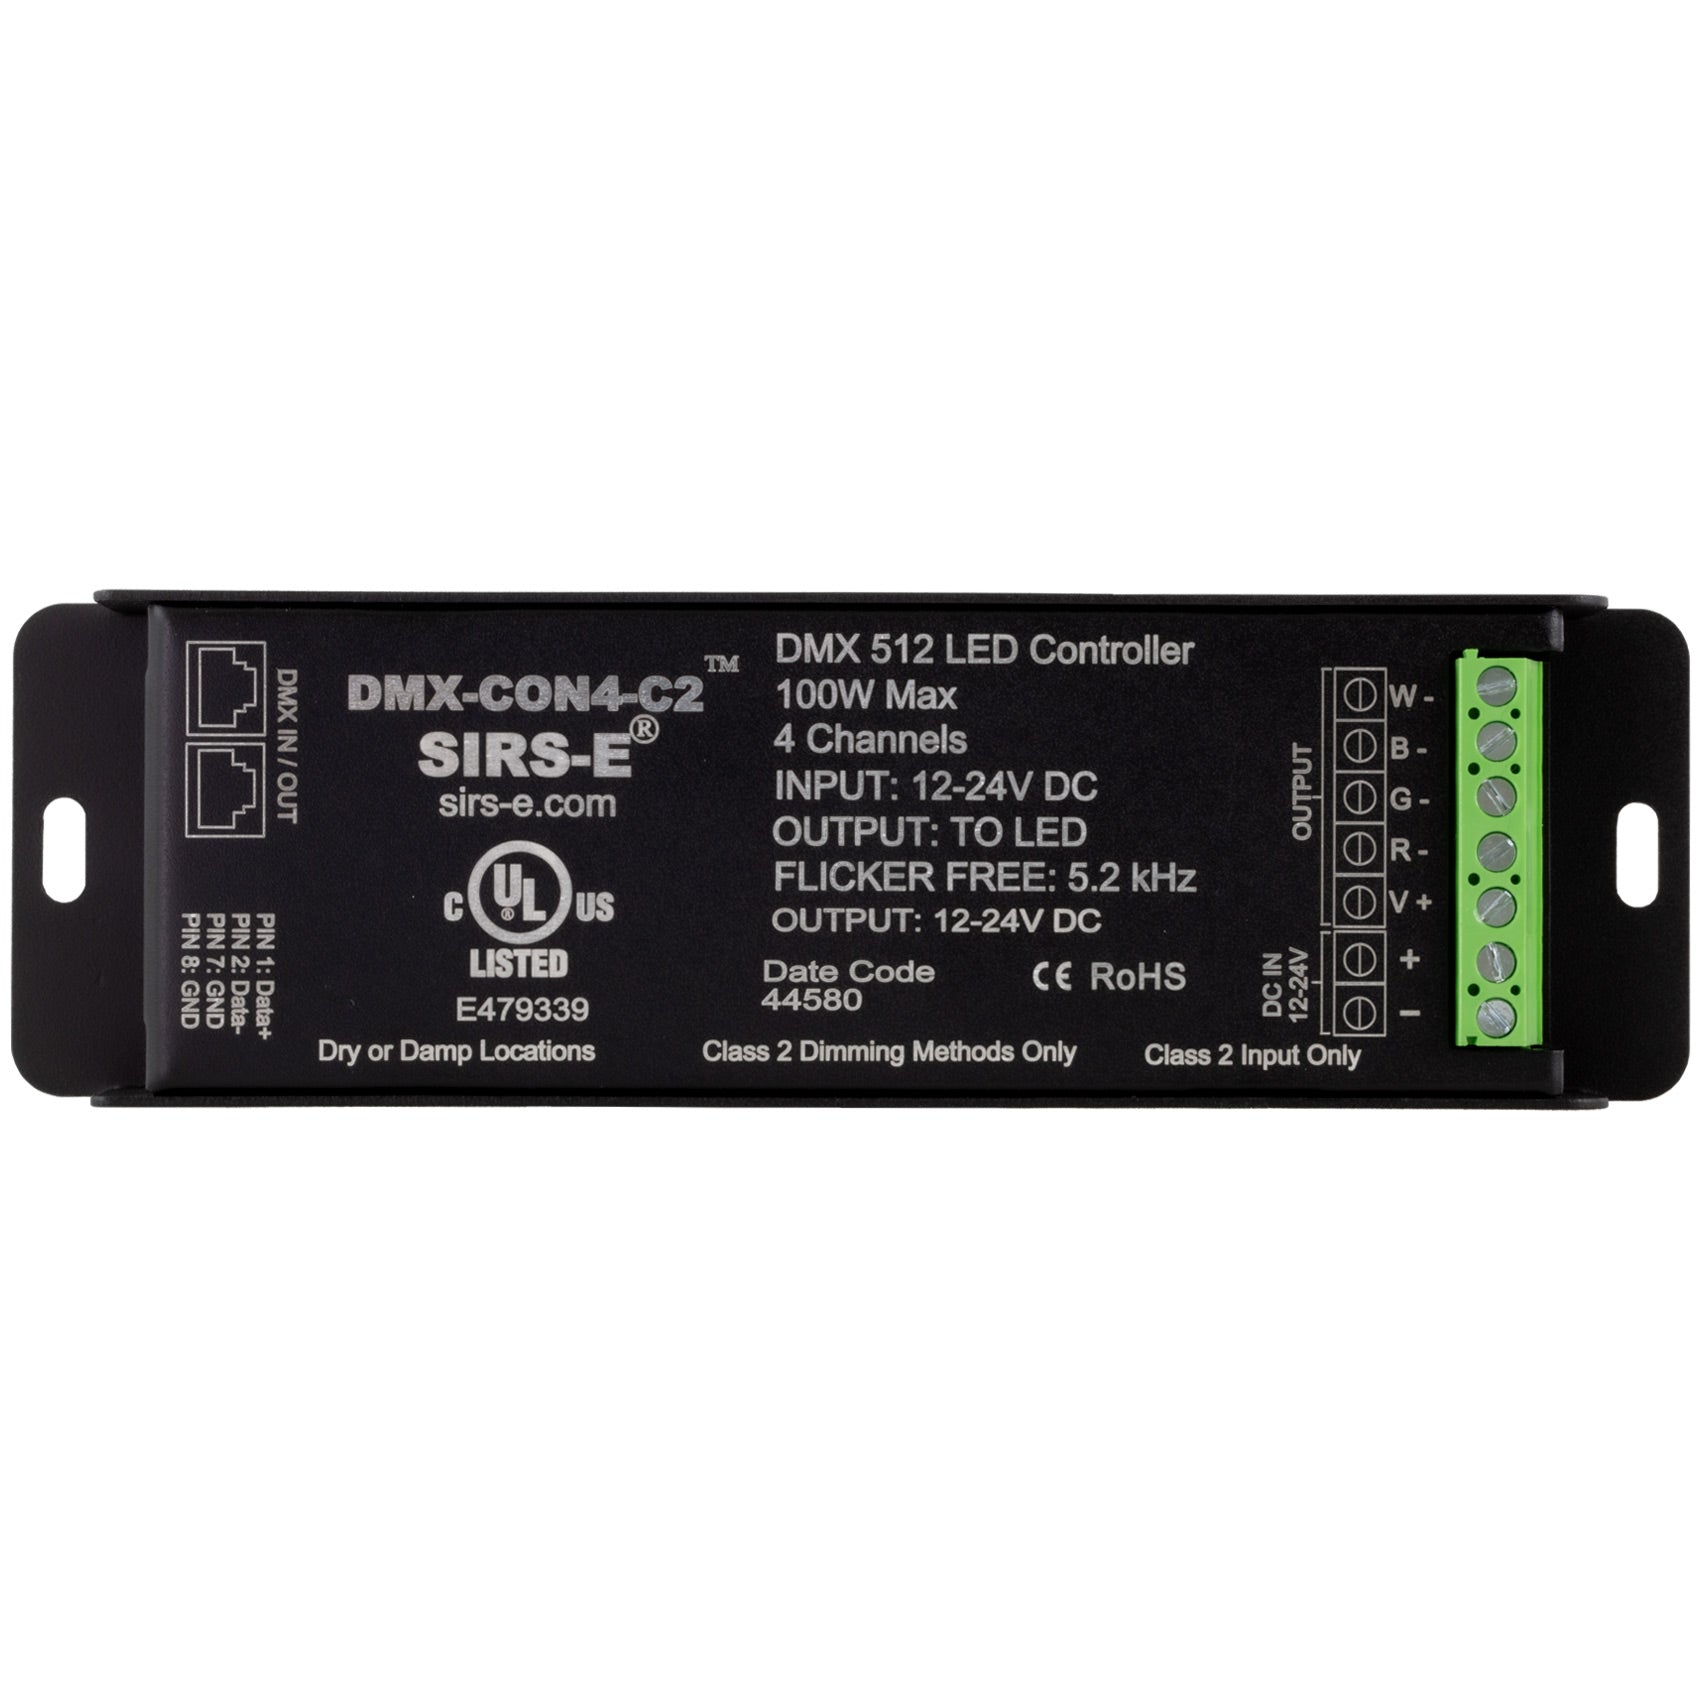 SIRS-E DMX-CON4-C2 LED Decoder Channel RGBW Controller, 12-24V DC, 1 sirs-e.us